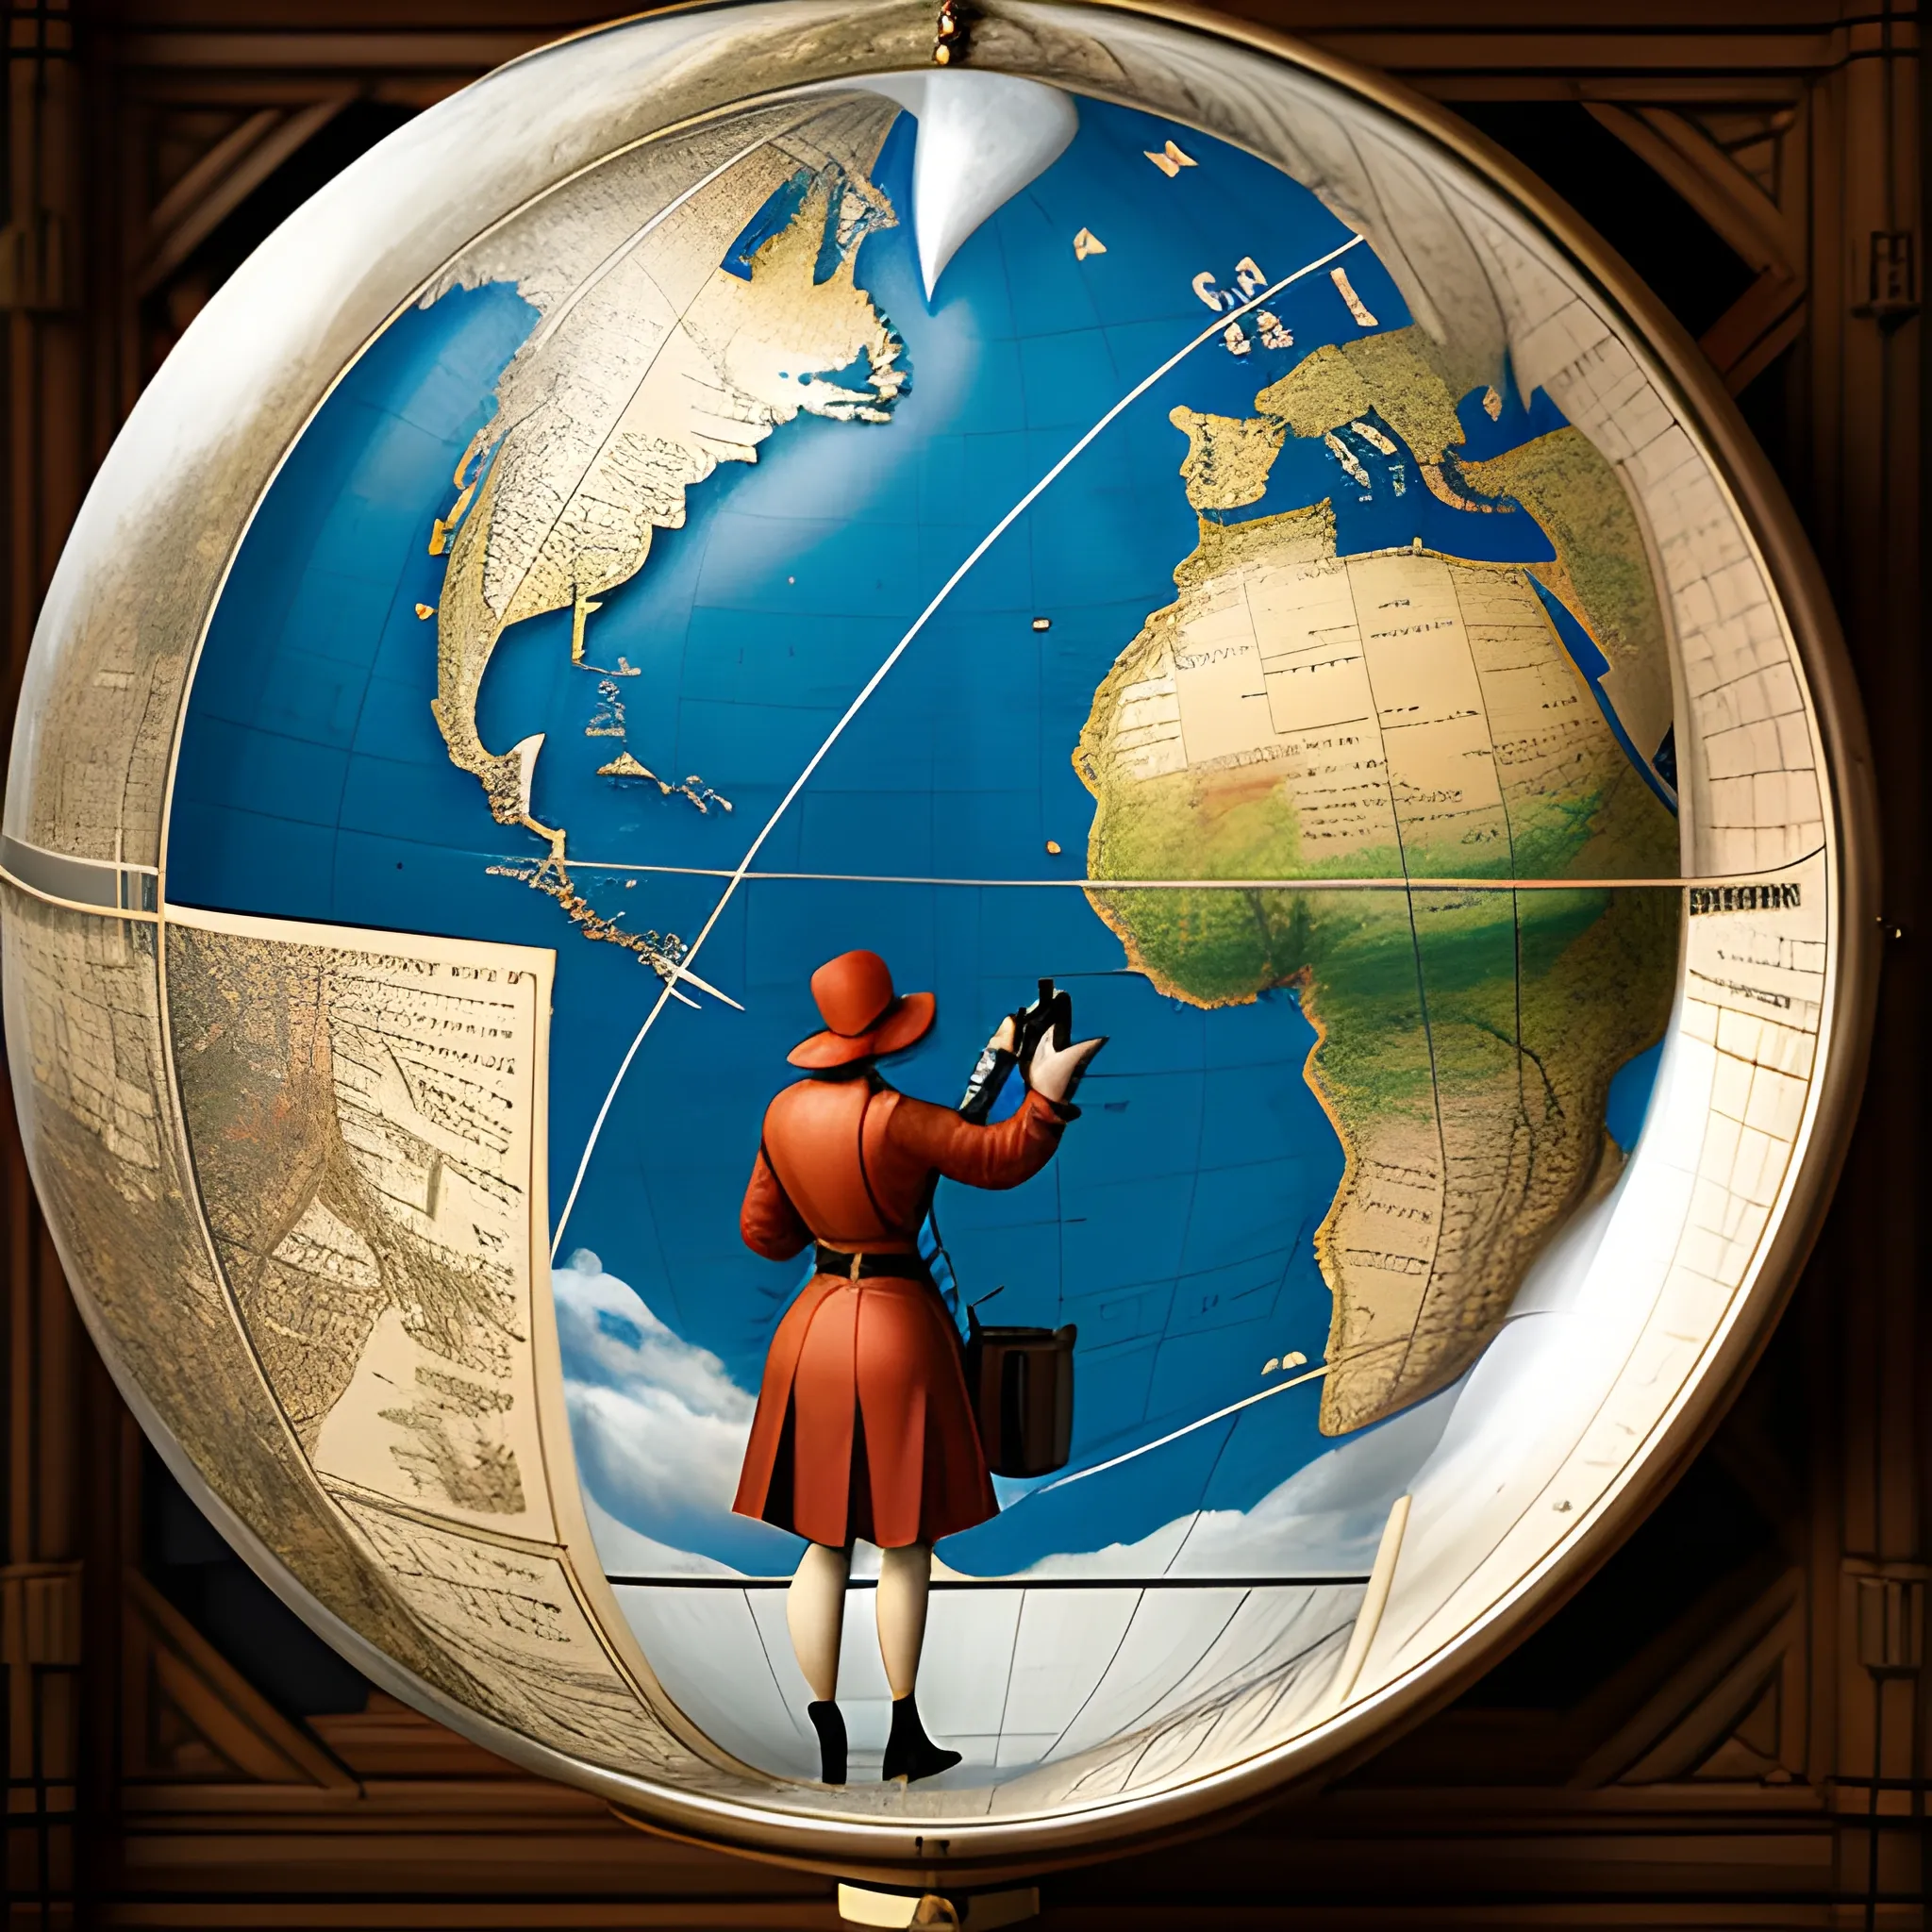 Create a portrait of a young female explorer standing by a window, leaning against a giant globe. Compasses, binoculars, magnifying glass and maps fly in the air, Renaissance by Michelangelo